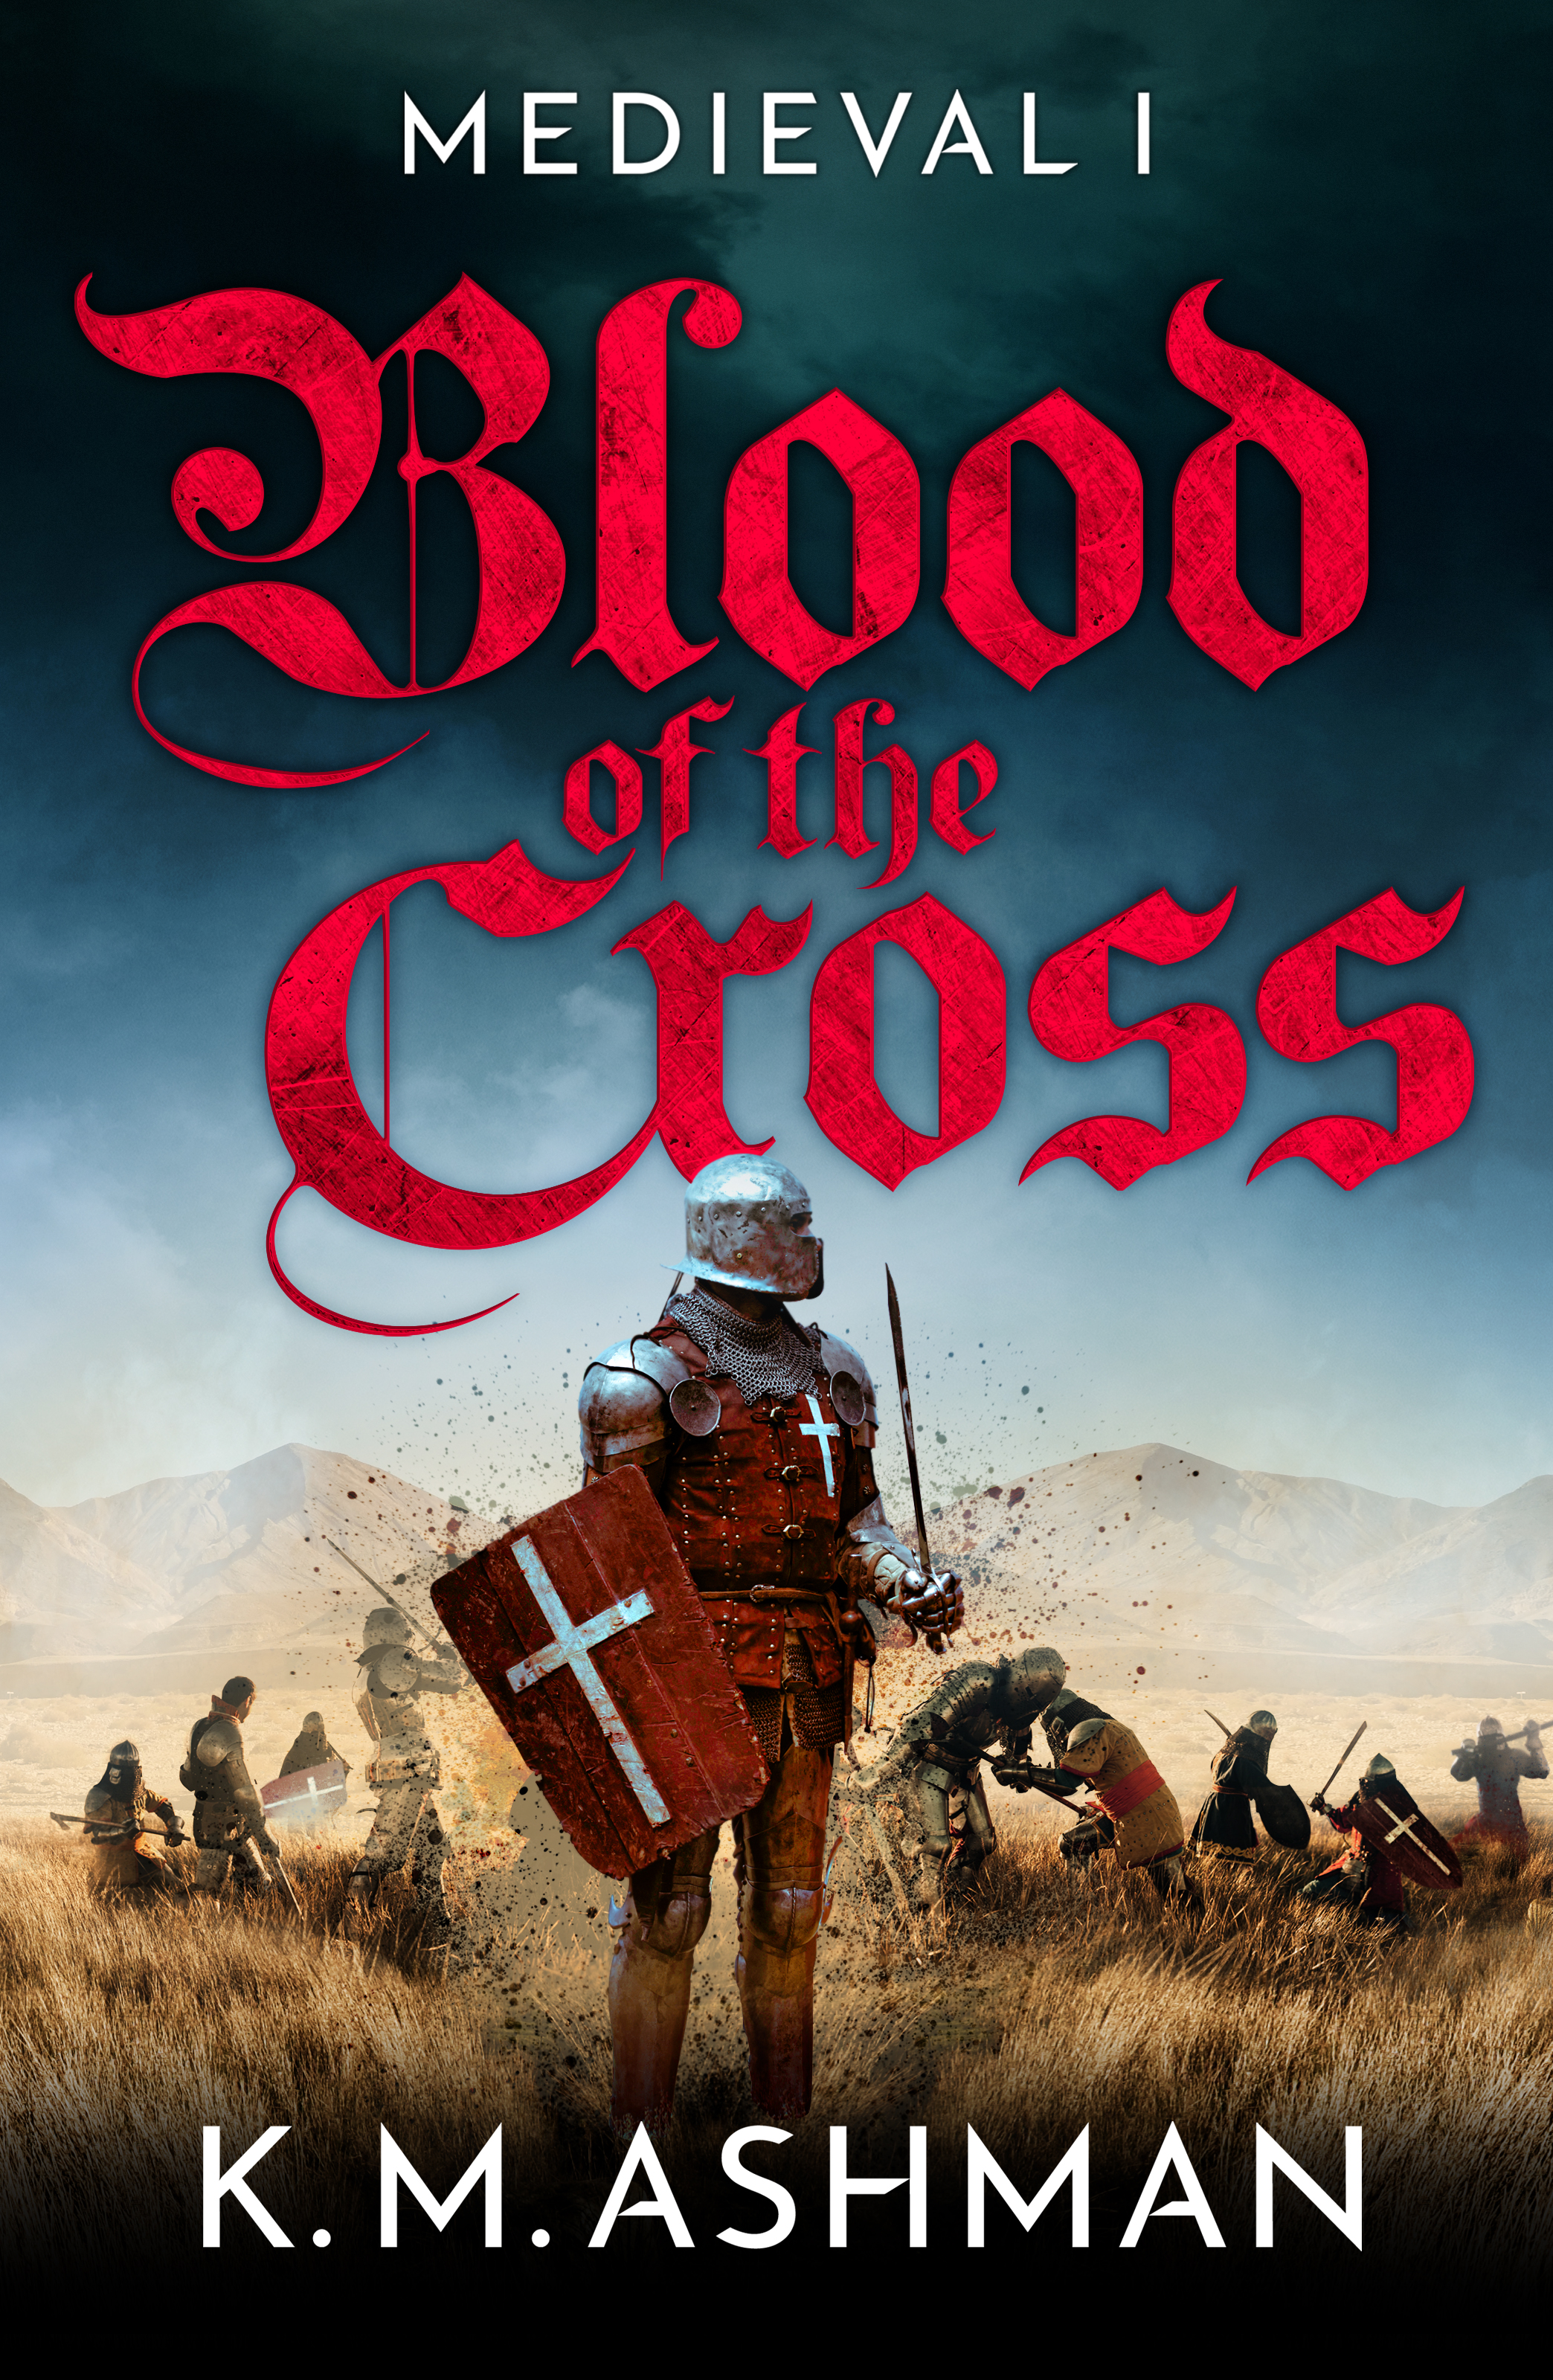 Medieval ? Blood of the Cross